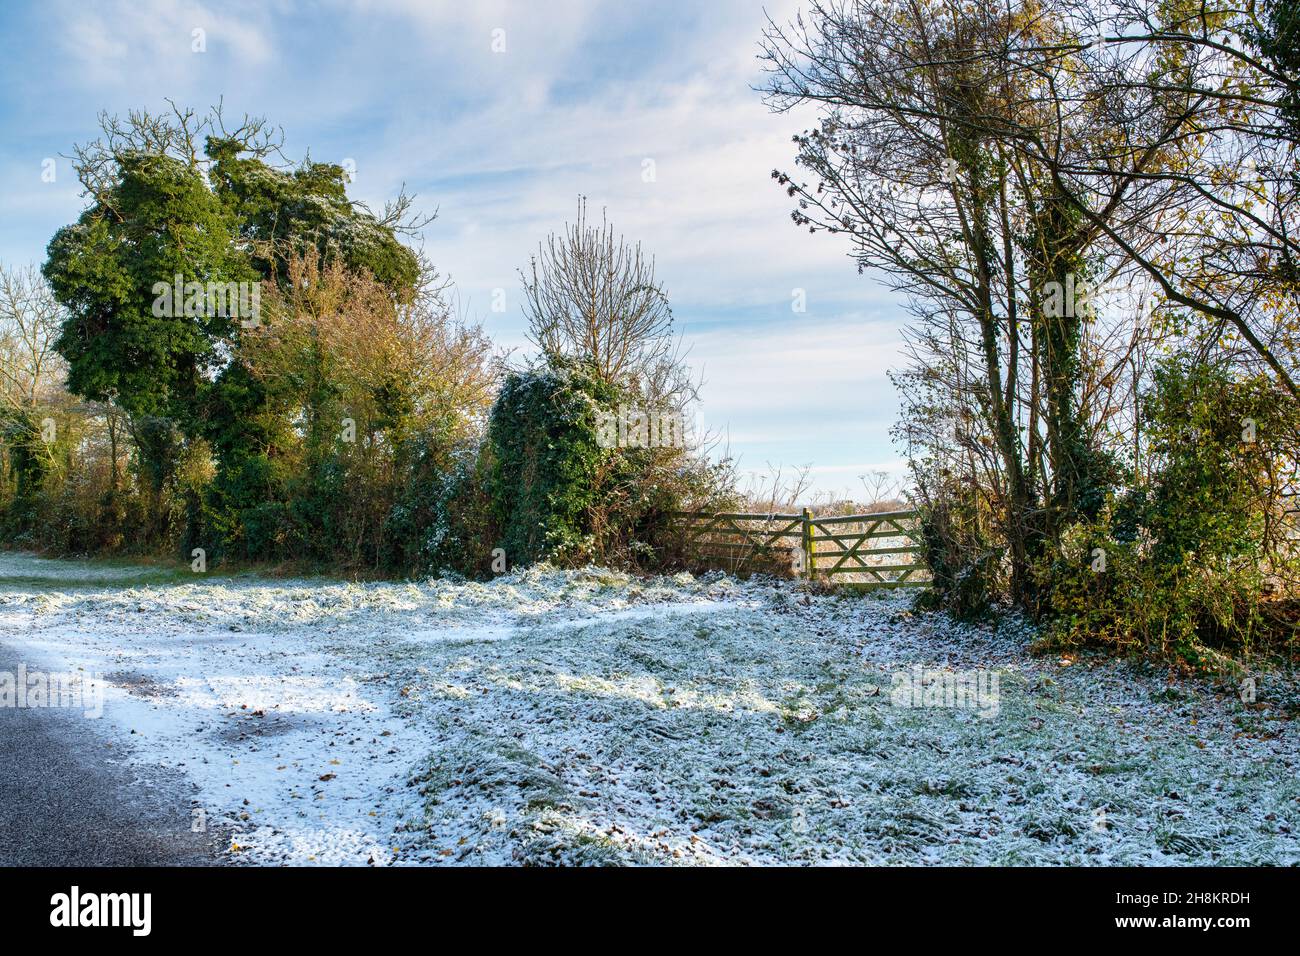 Late autumn, early winter snow in the Oxfordshire countryside, England Stock Photo